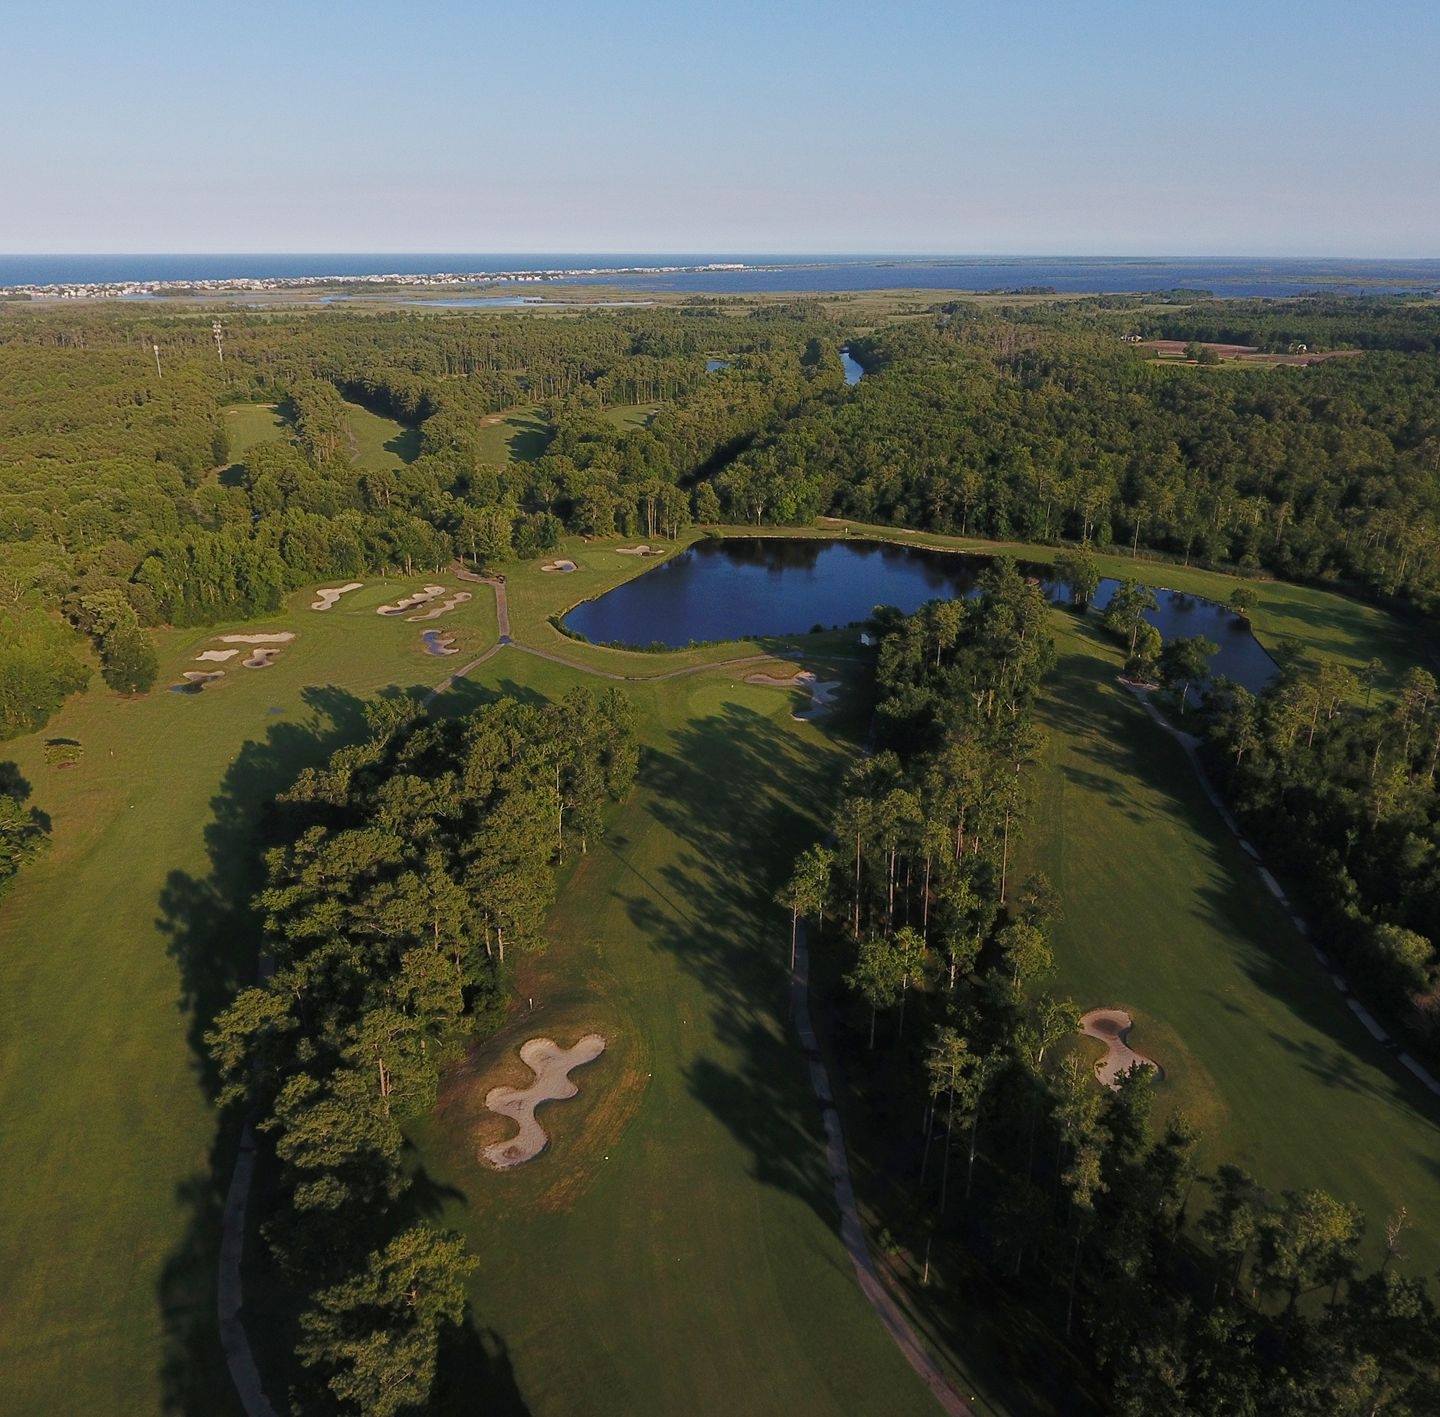 View of golf course from aerial perspective